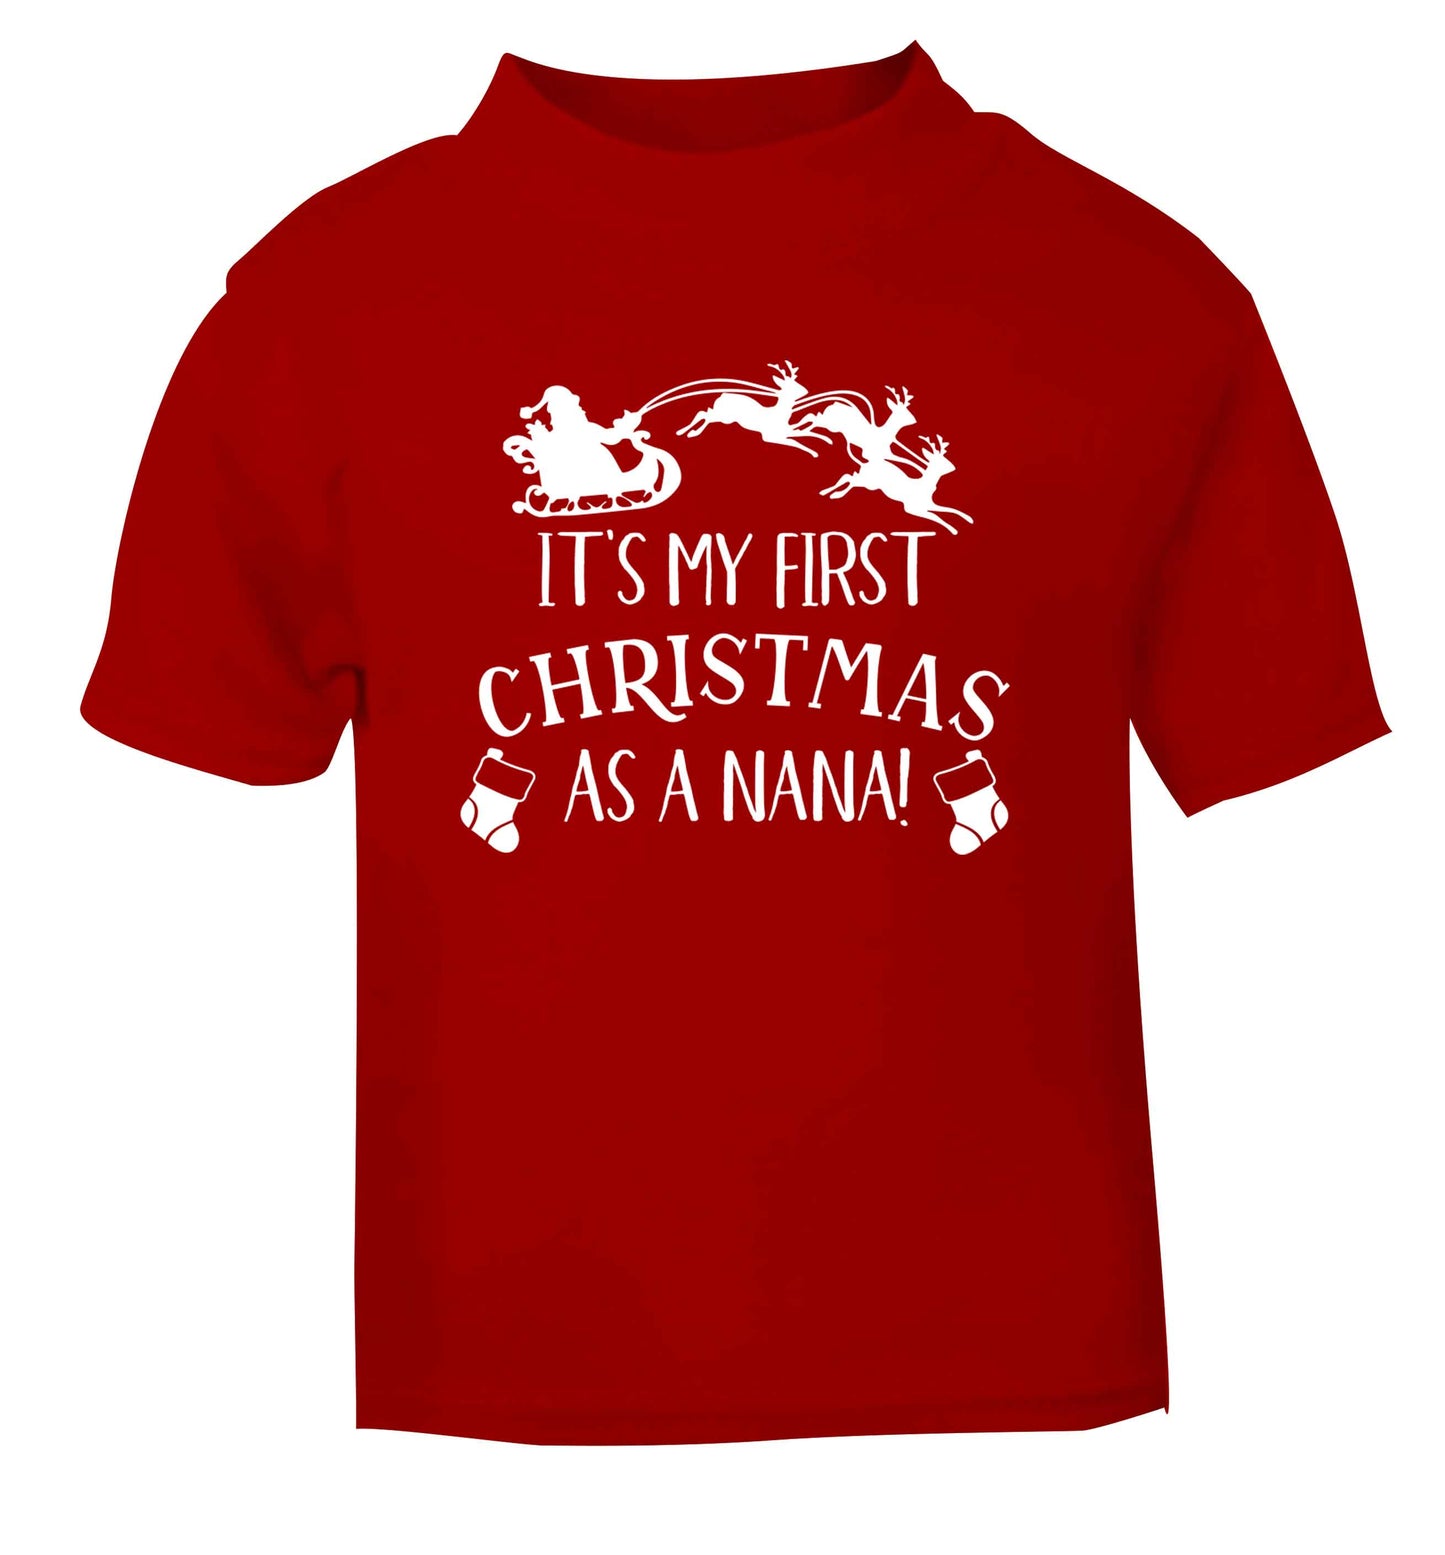 It's my first Christmas as a nana red Baby Toddler Tshirt 2 Years